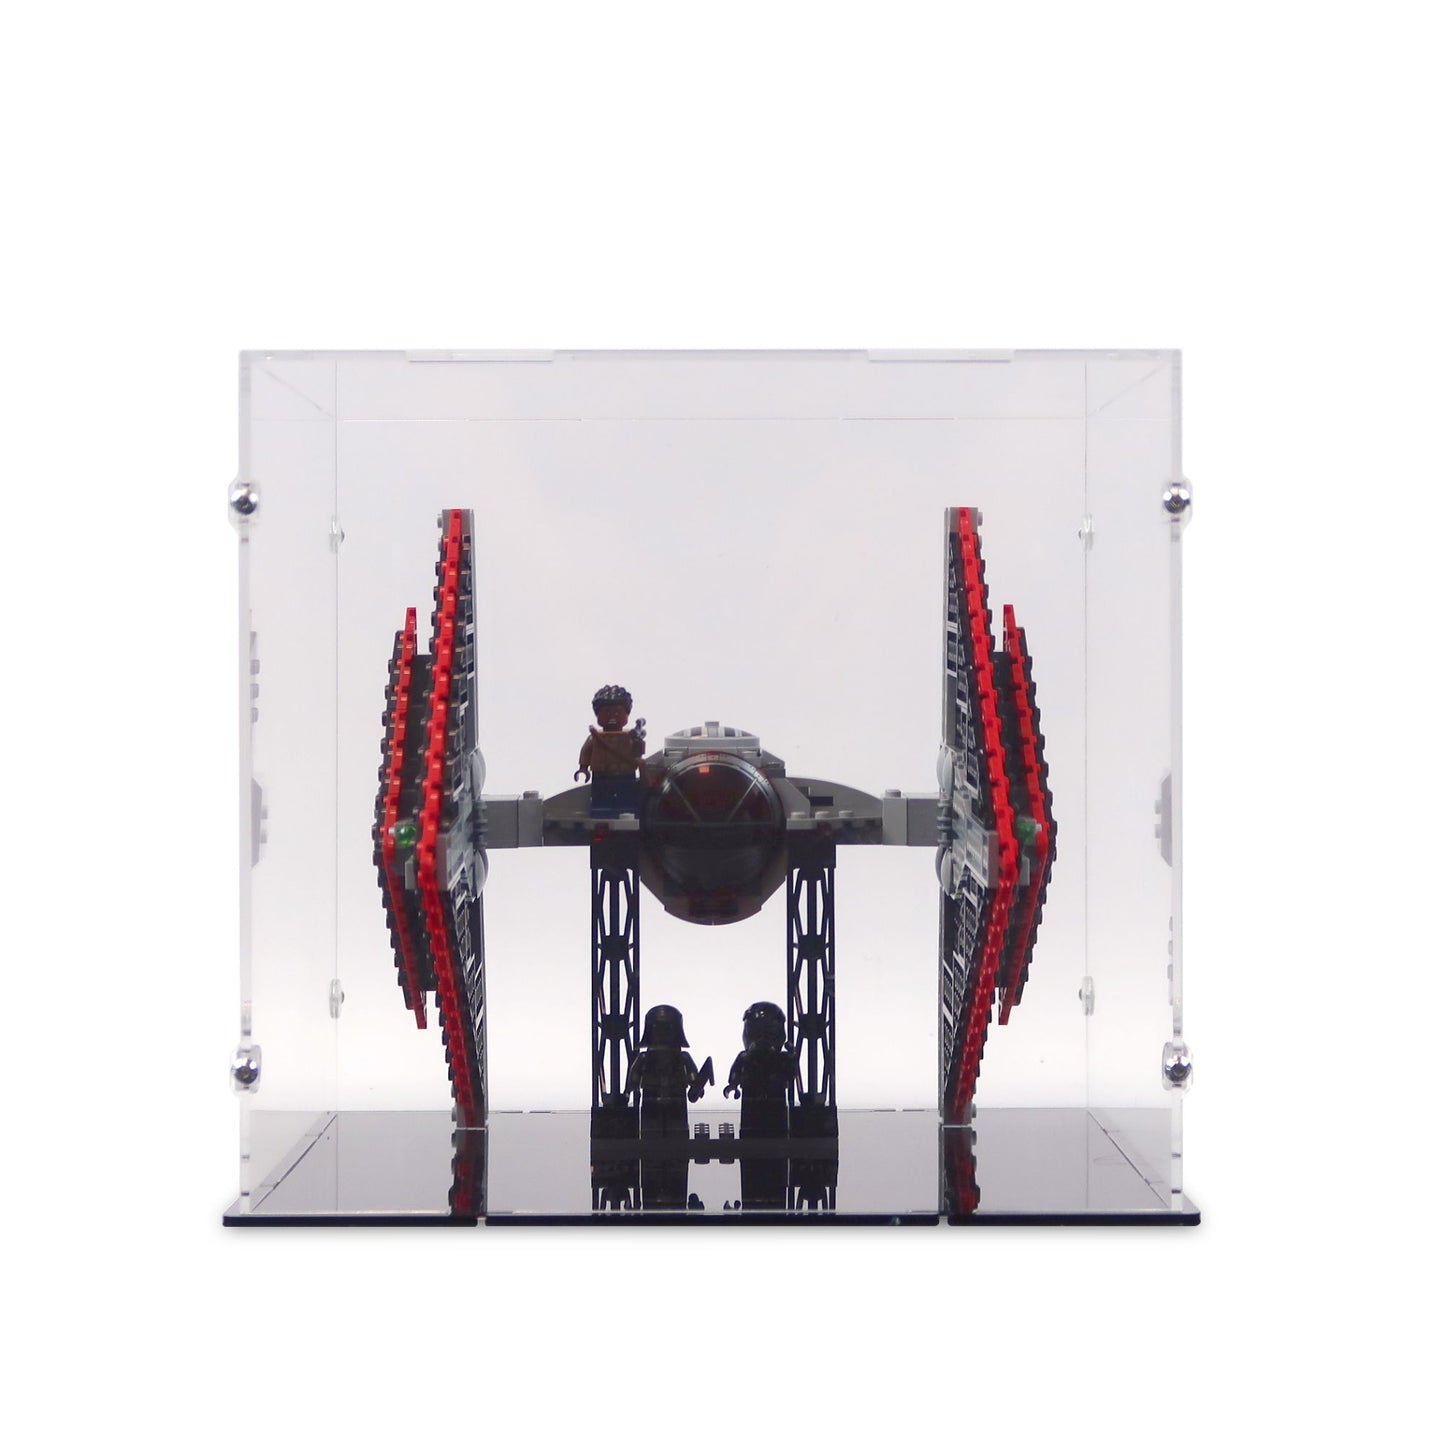 75272 Sith TIE Fighter Display Case